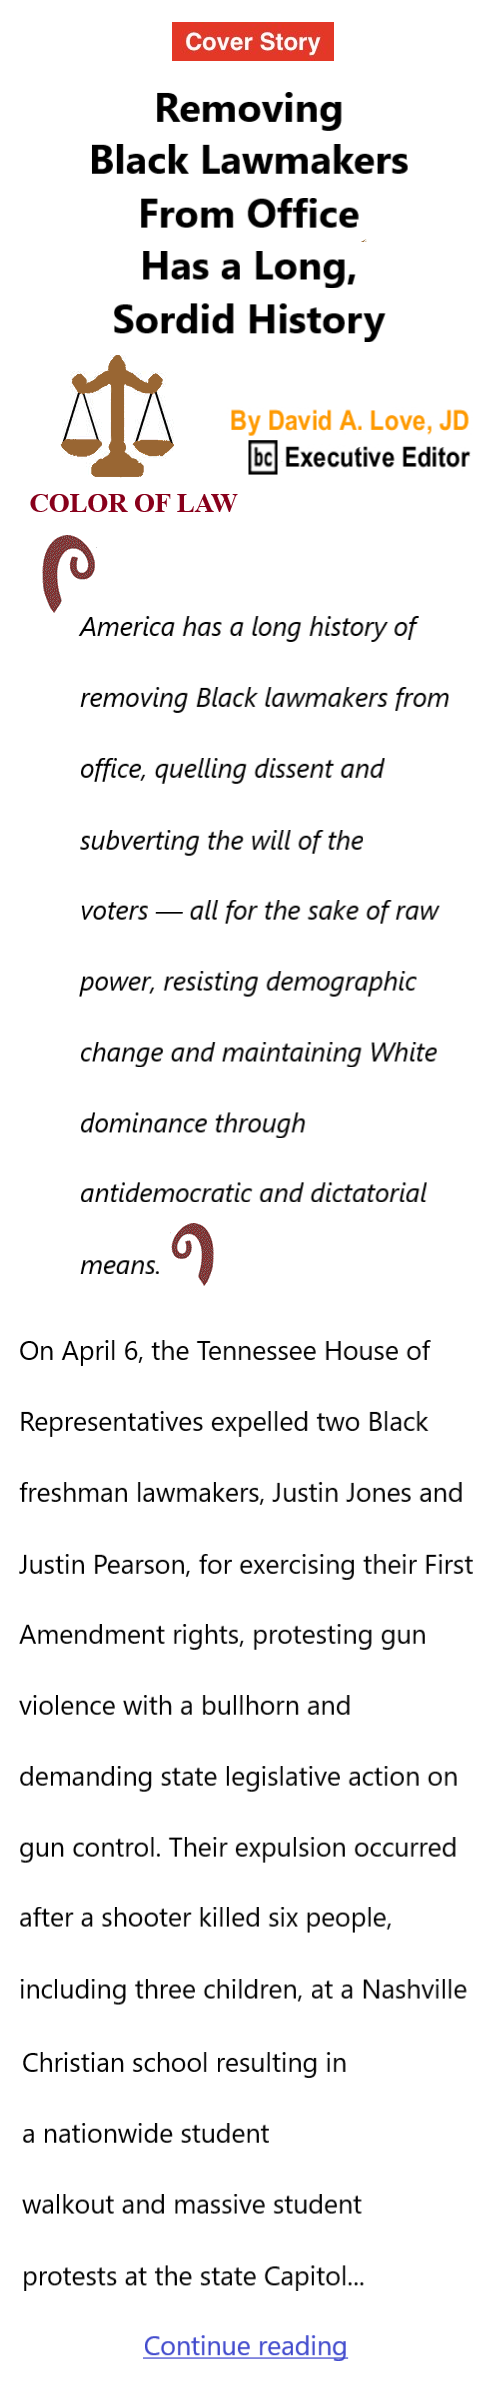 BlackCommentator.com Apr 20, 2023 - Issue 952: Cover Story - Removing Black Lawmakers From Office Has a Long, Sordid History - Color of Law By David A. Love, JD, BC Executive Editor